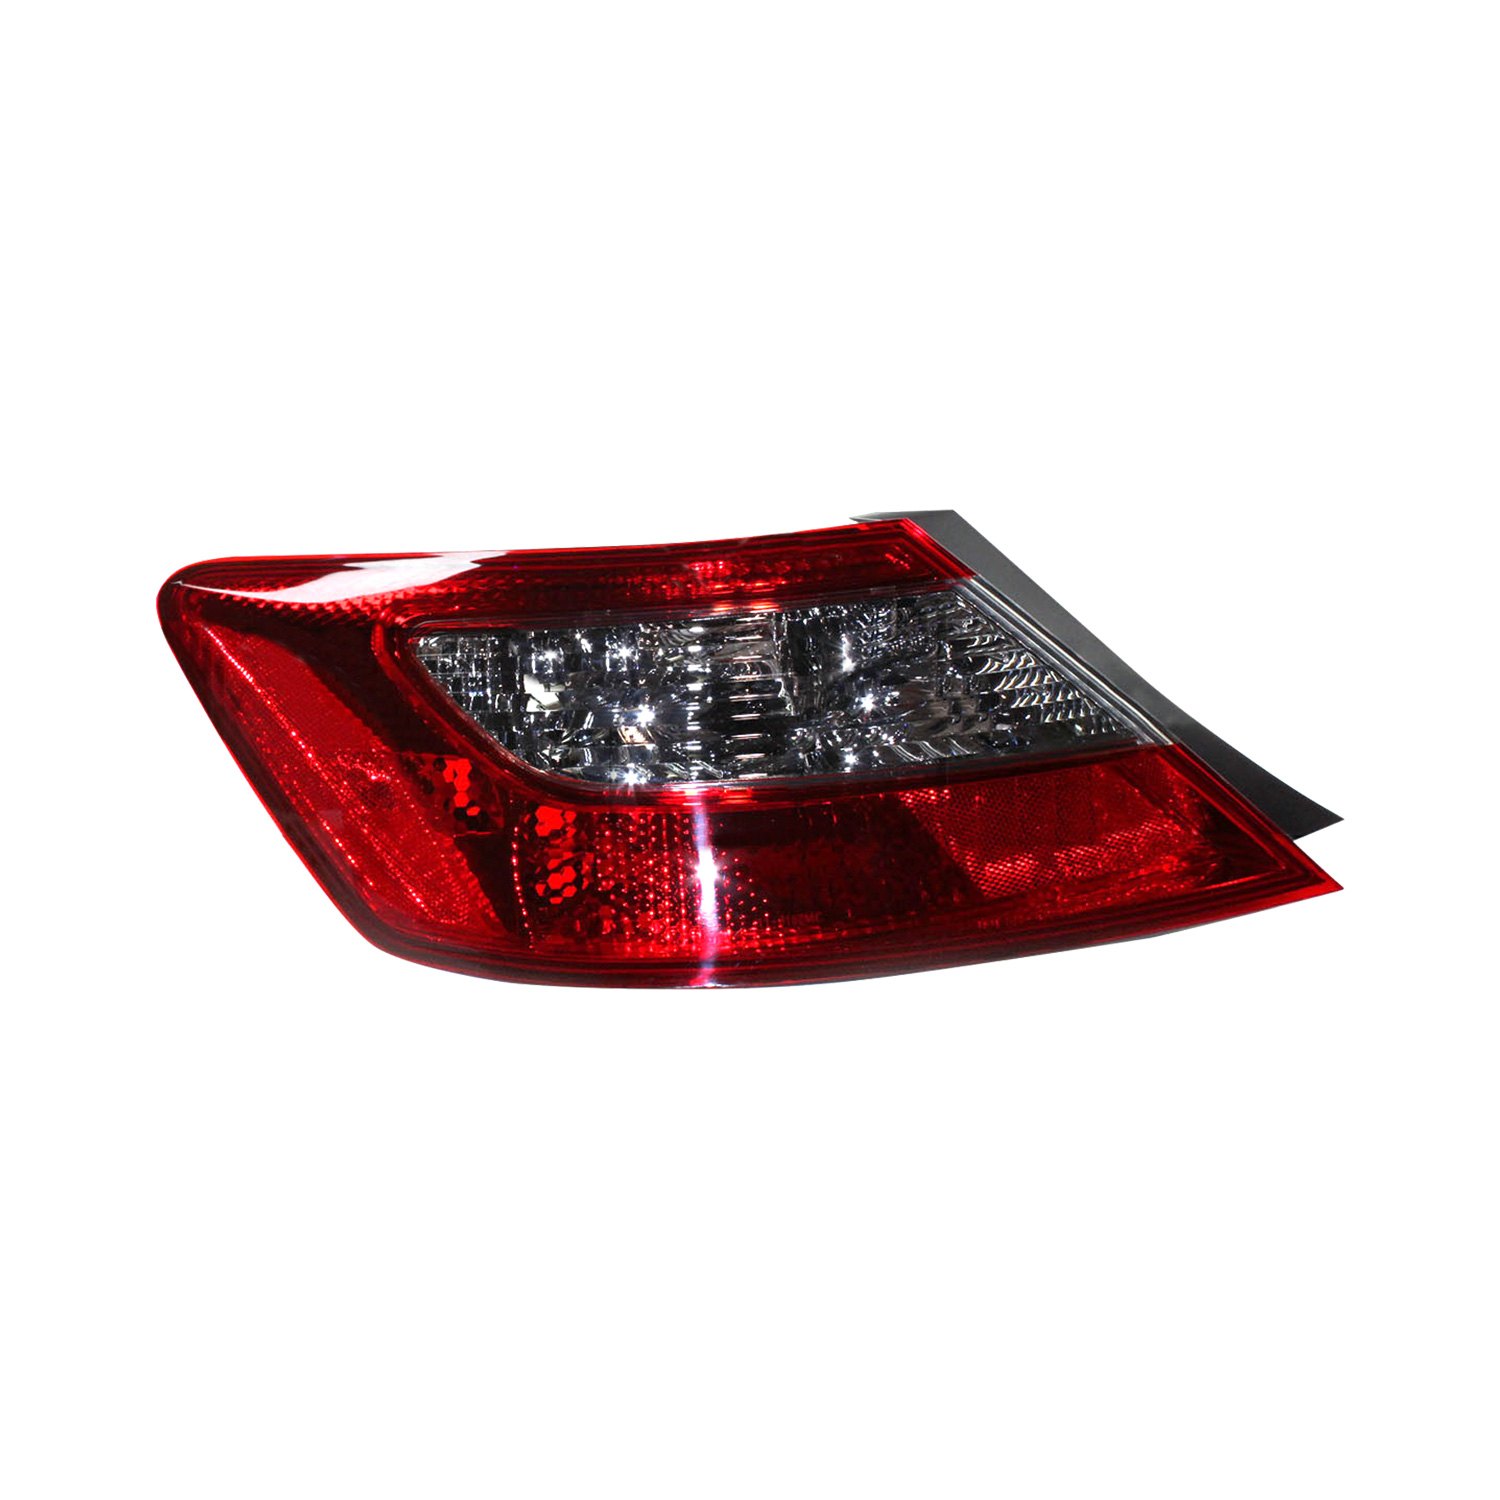 For Honda Civic 2009-2011 TYC 11-6168-91-1 Driver Side Replacement Tail Light | eBay 2009 Honda Civic Tail Light Cover Replacement